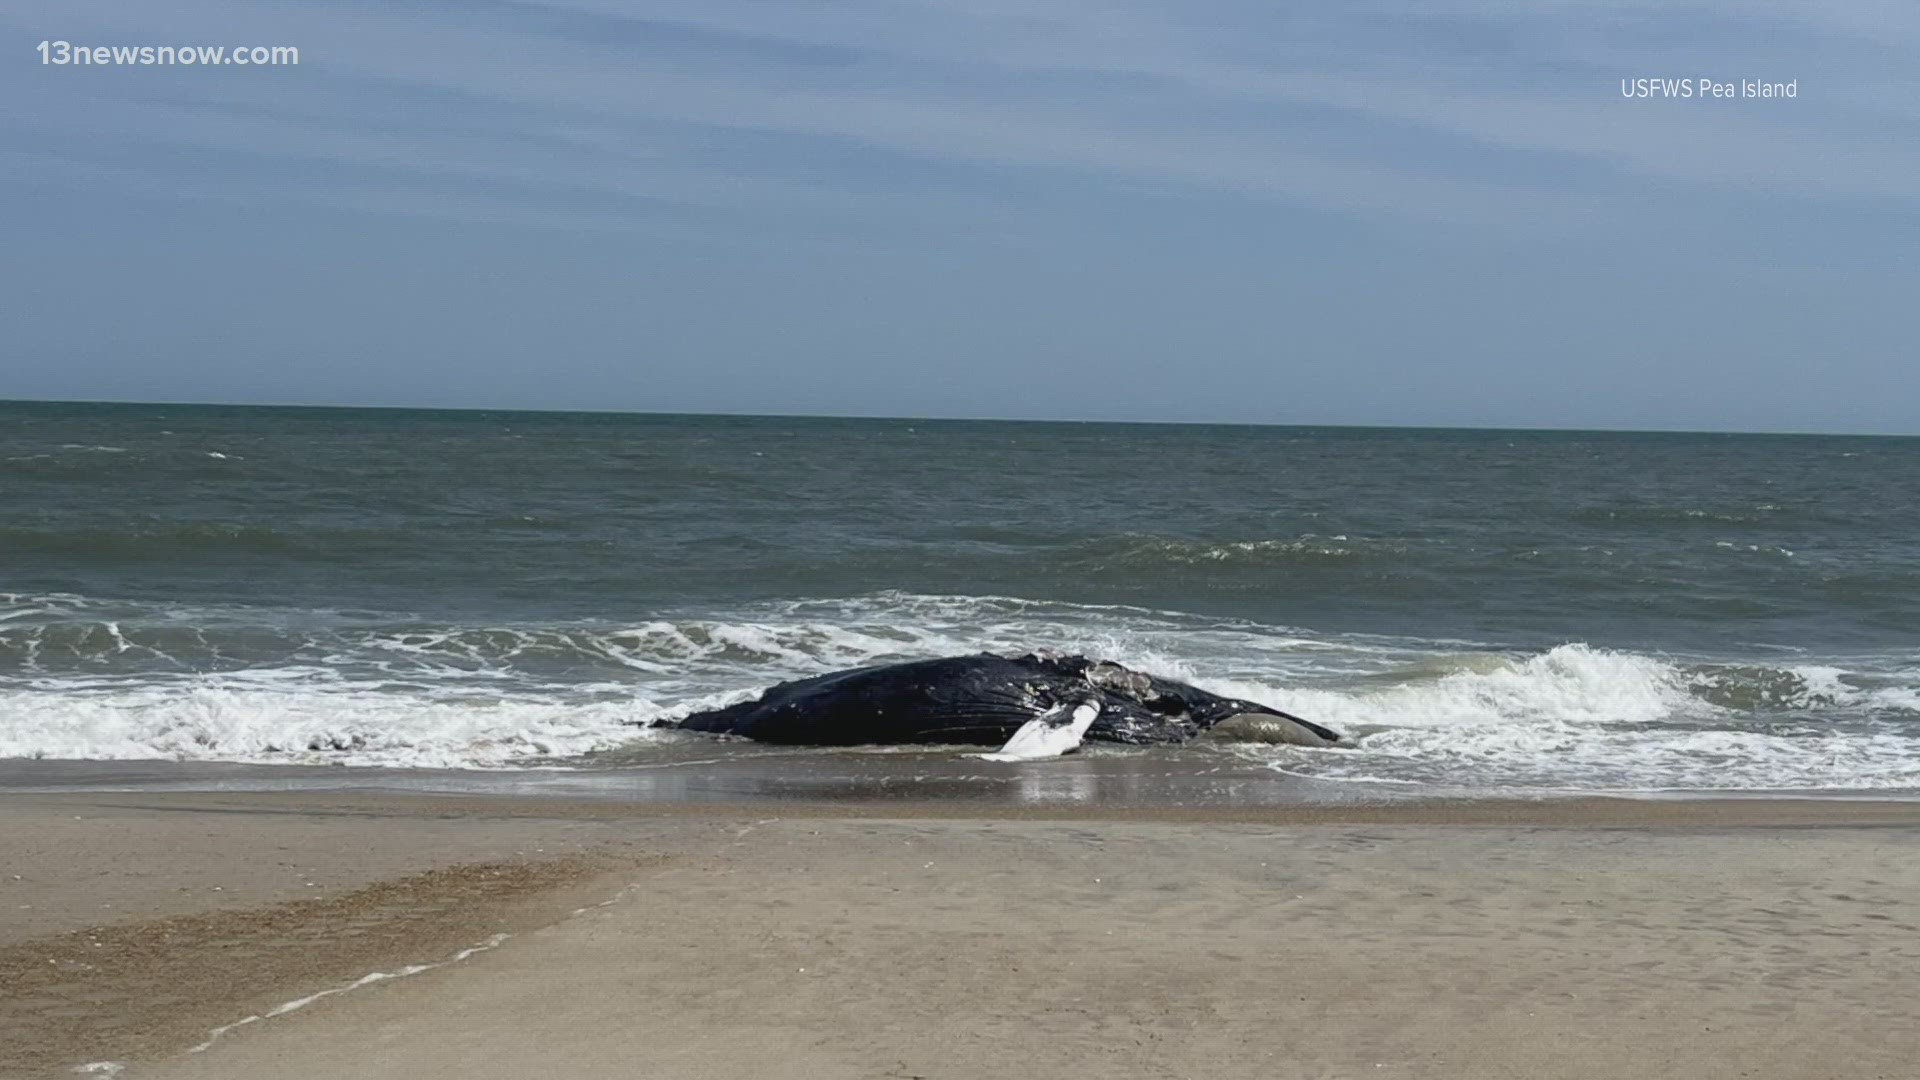 . The humpback whale is sitting on the shore of Pea Island National Wildlife Refuge tonight.